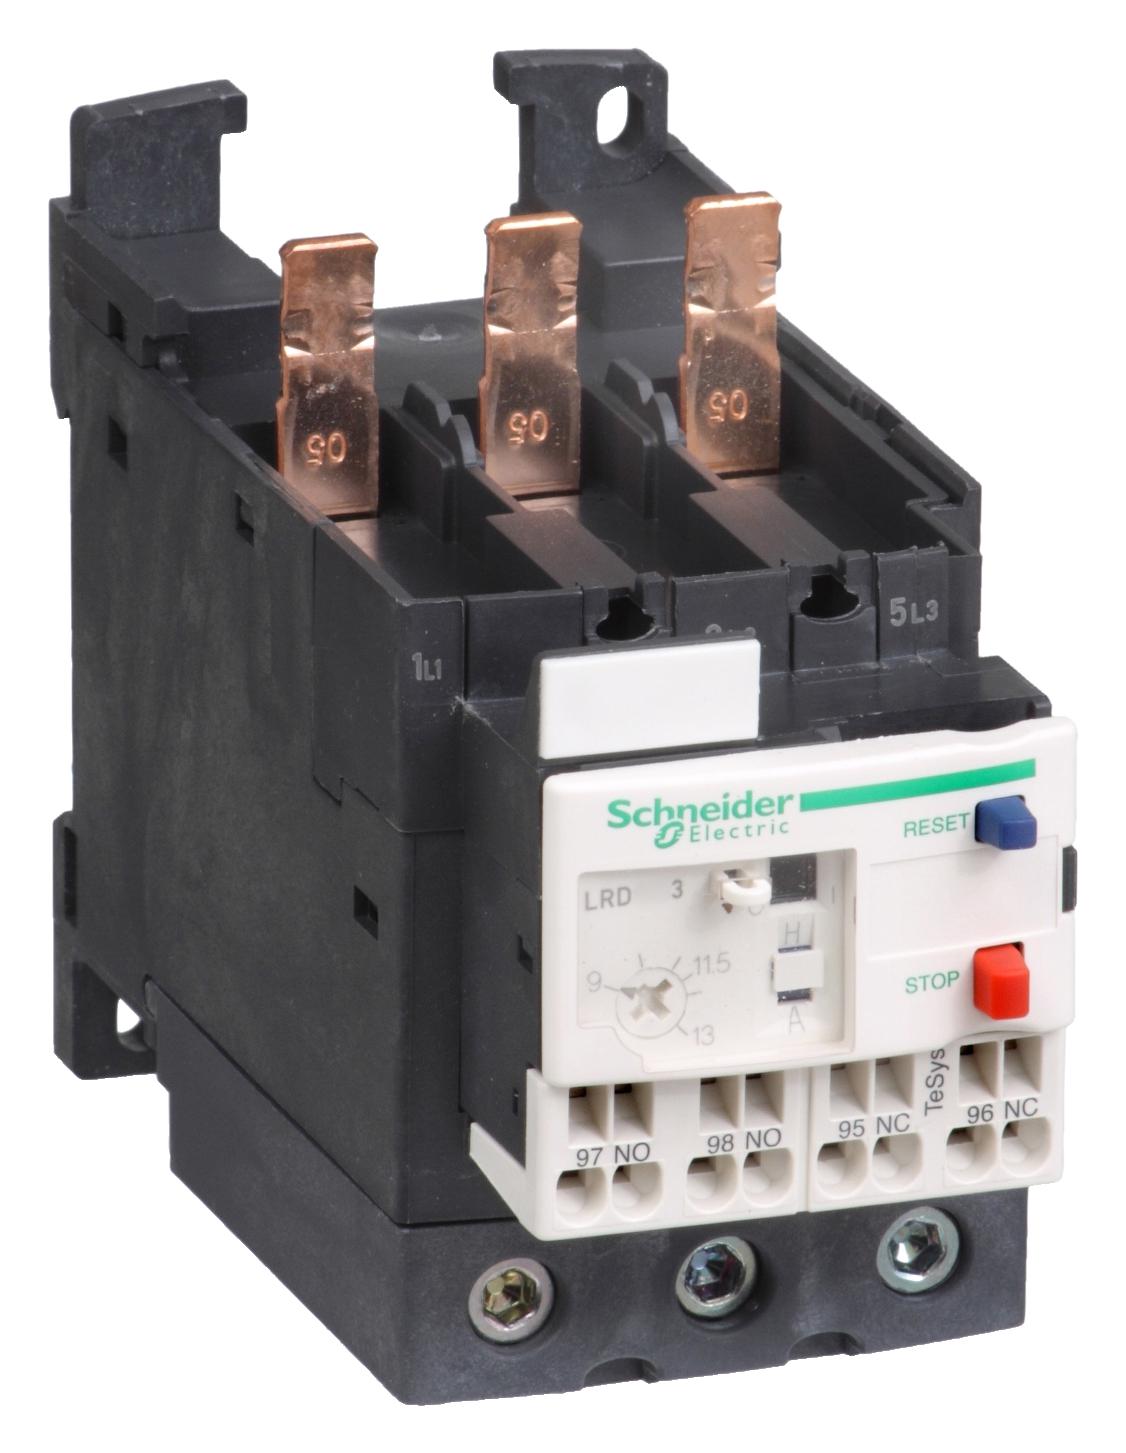 LRD3653 THERMAL OVERLOAD RELAY, 48A-65A, 690VAC SCHNEIDER ELECTRIC